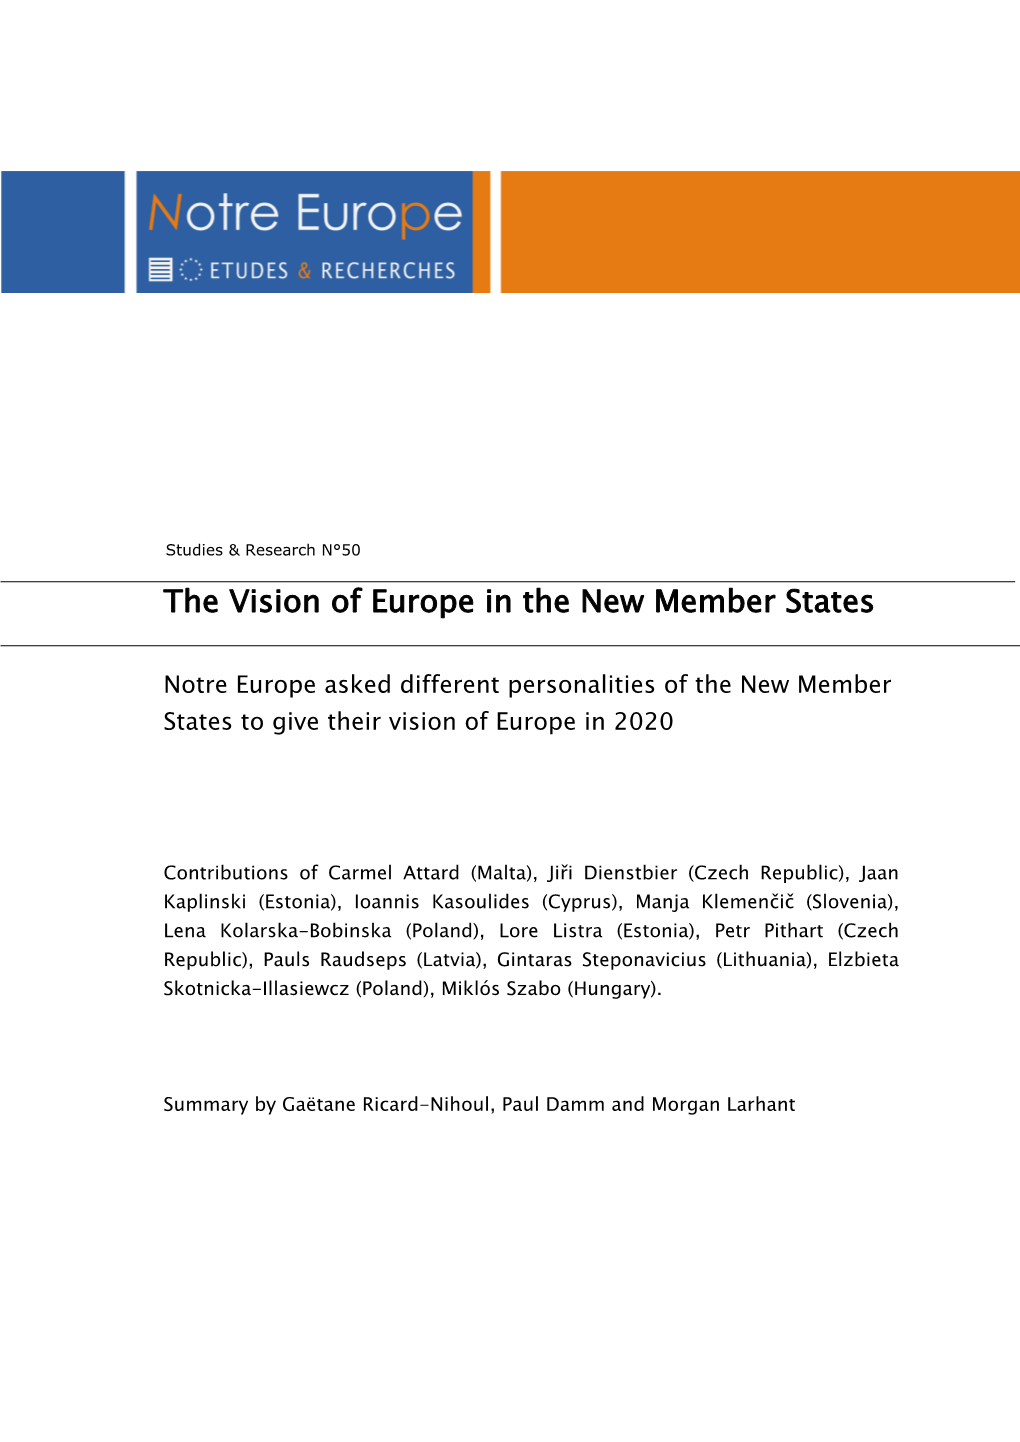 The Vision of Europe in the New Member States